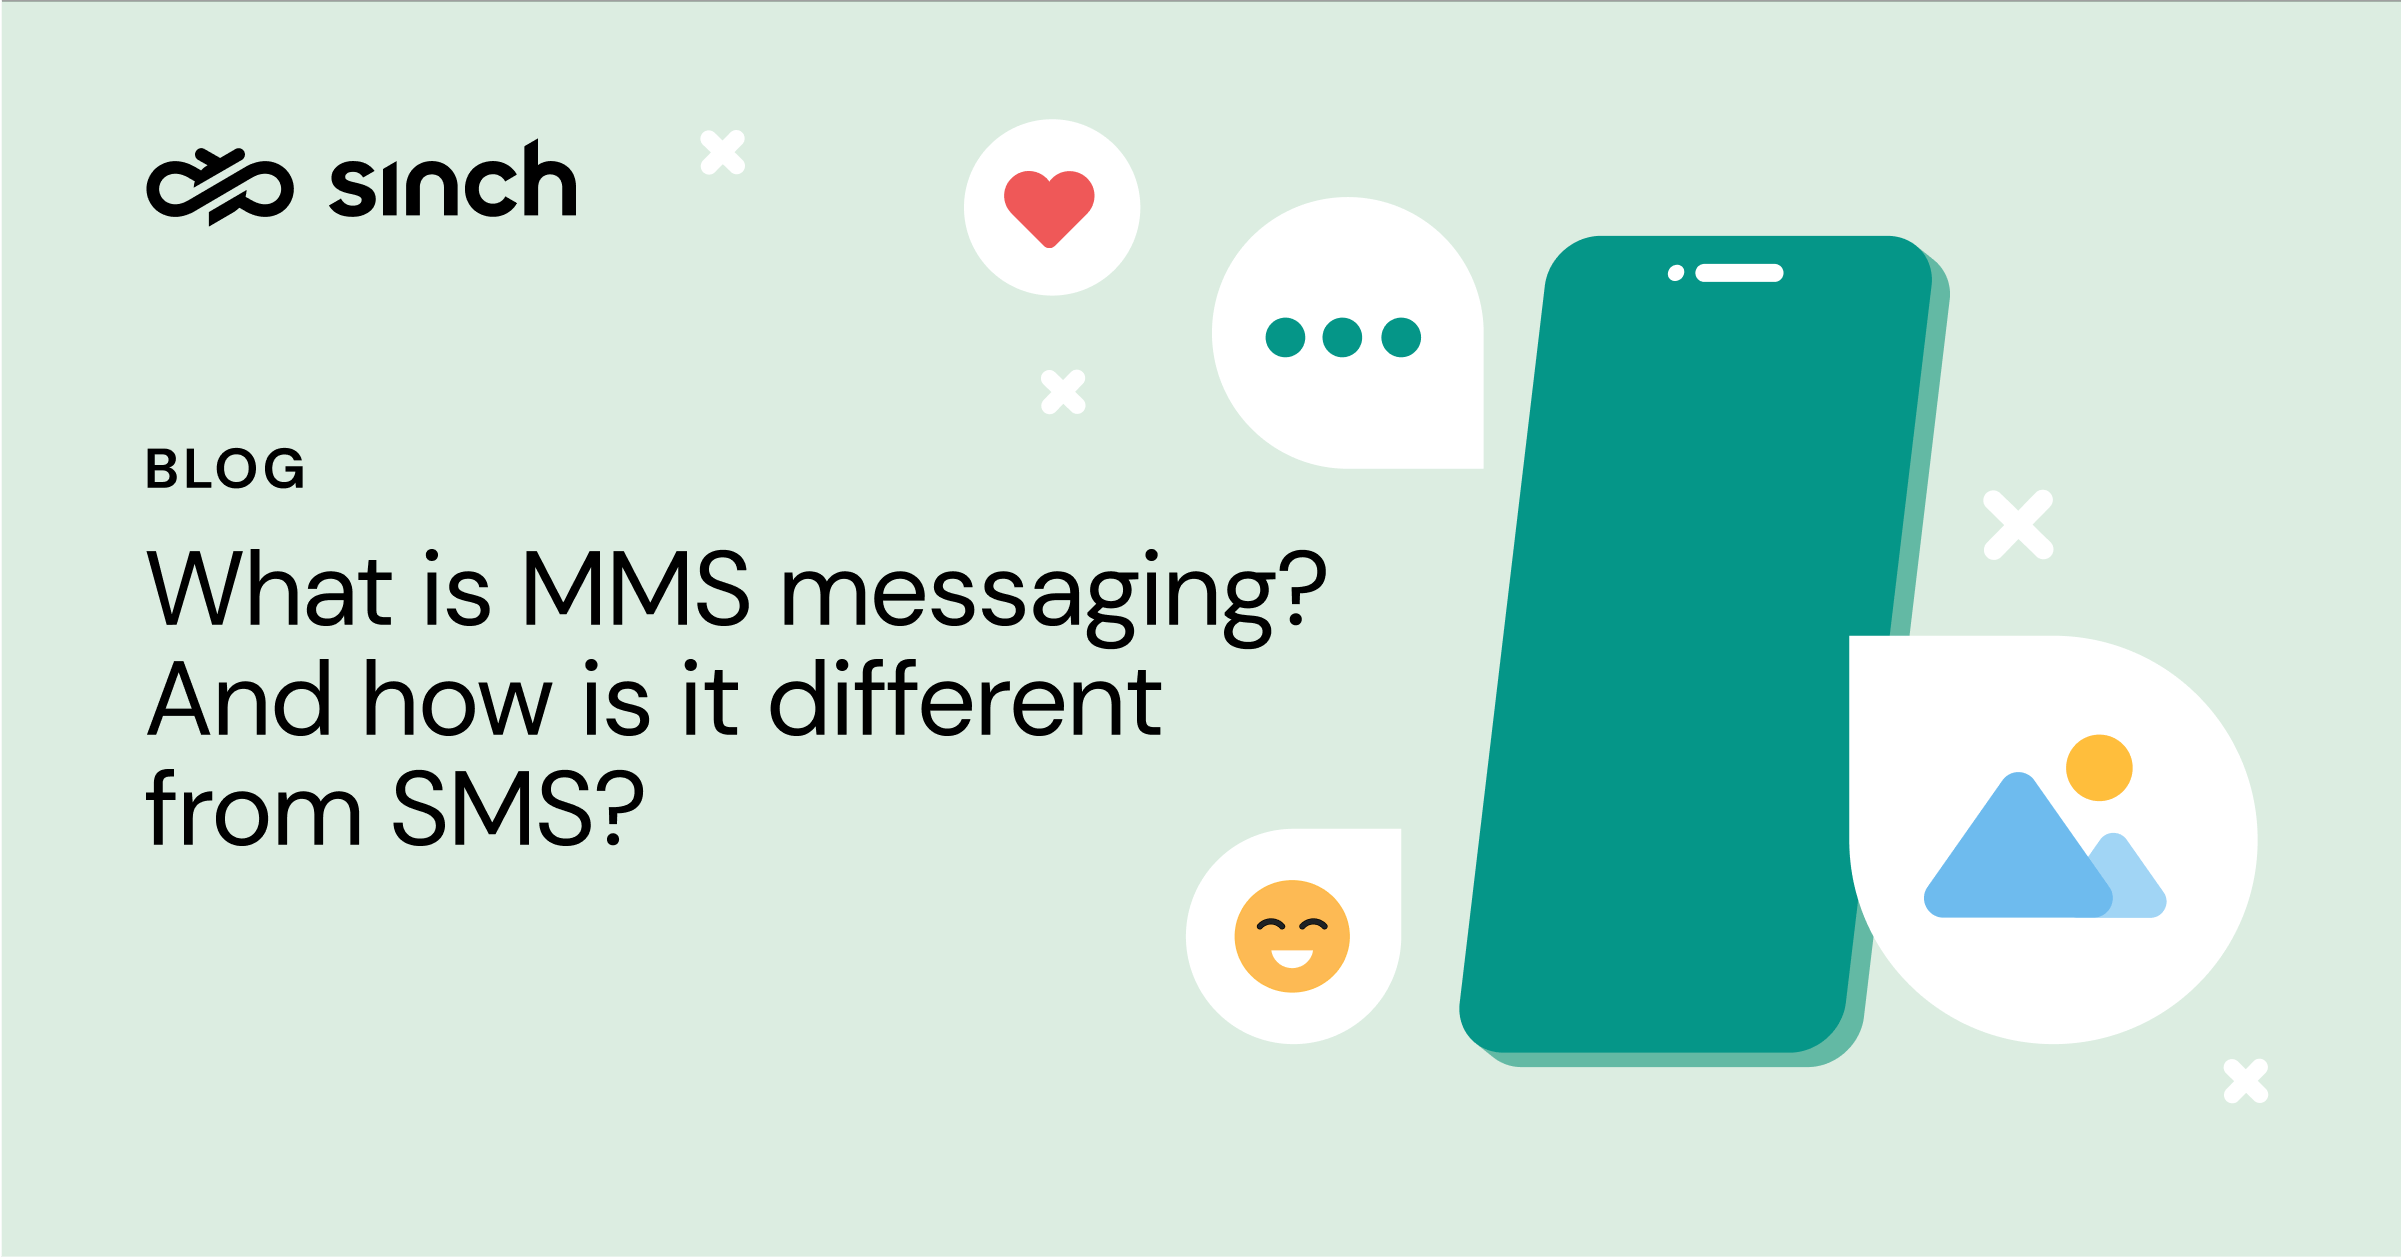 SMS Vs. MMS: How Are They Different